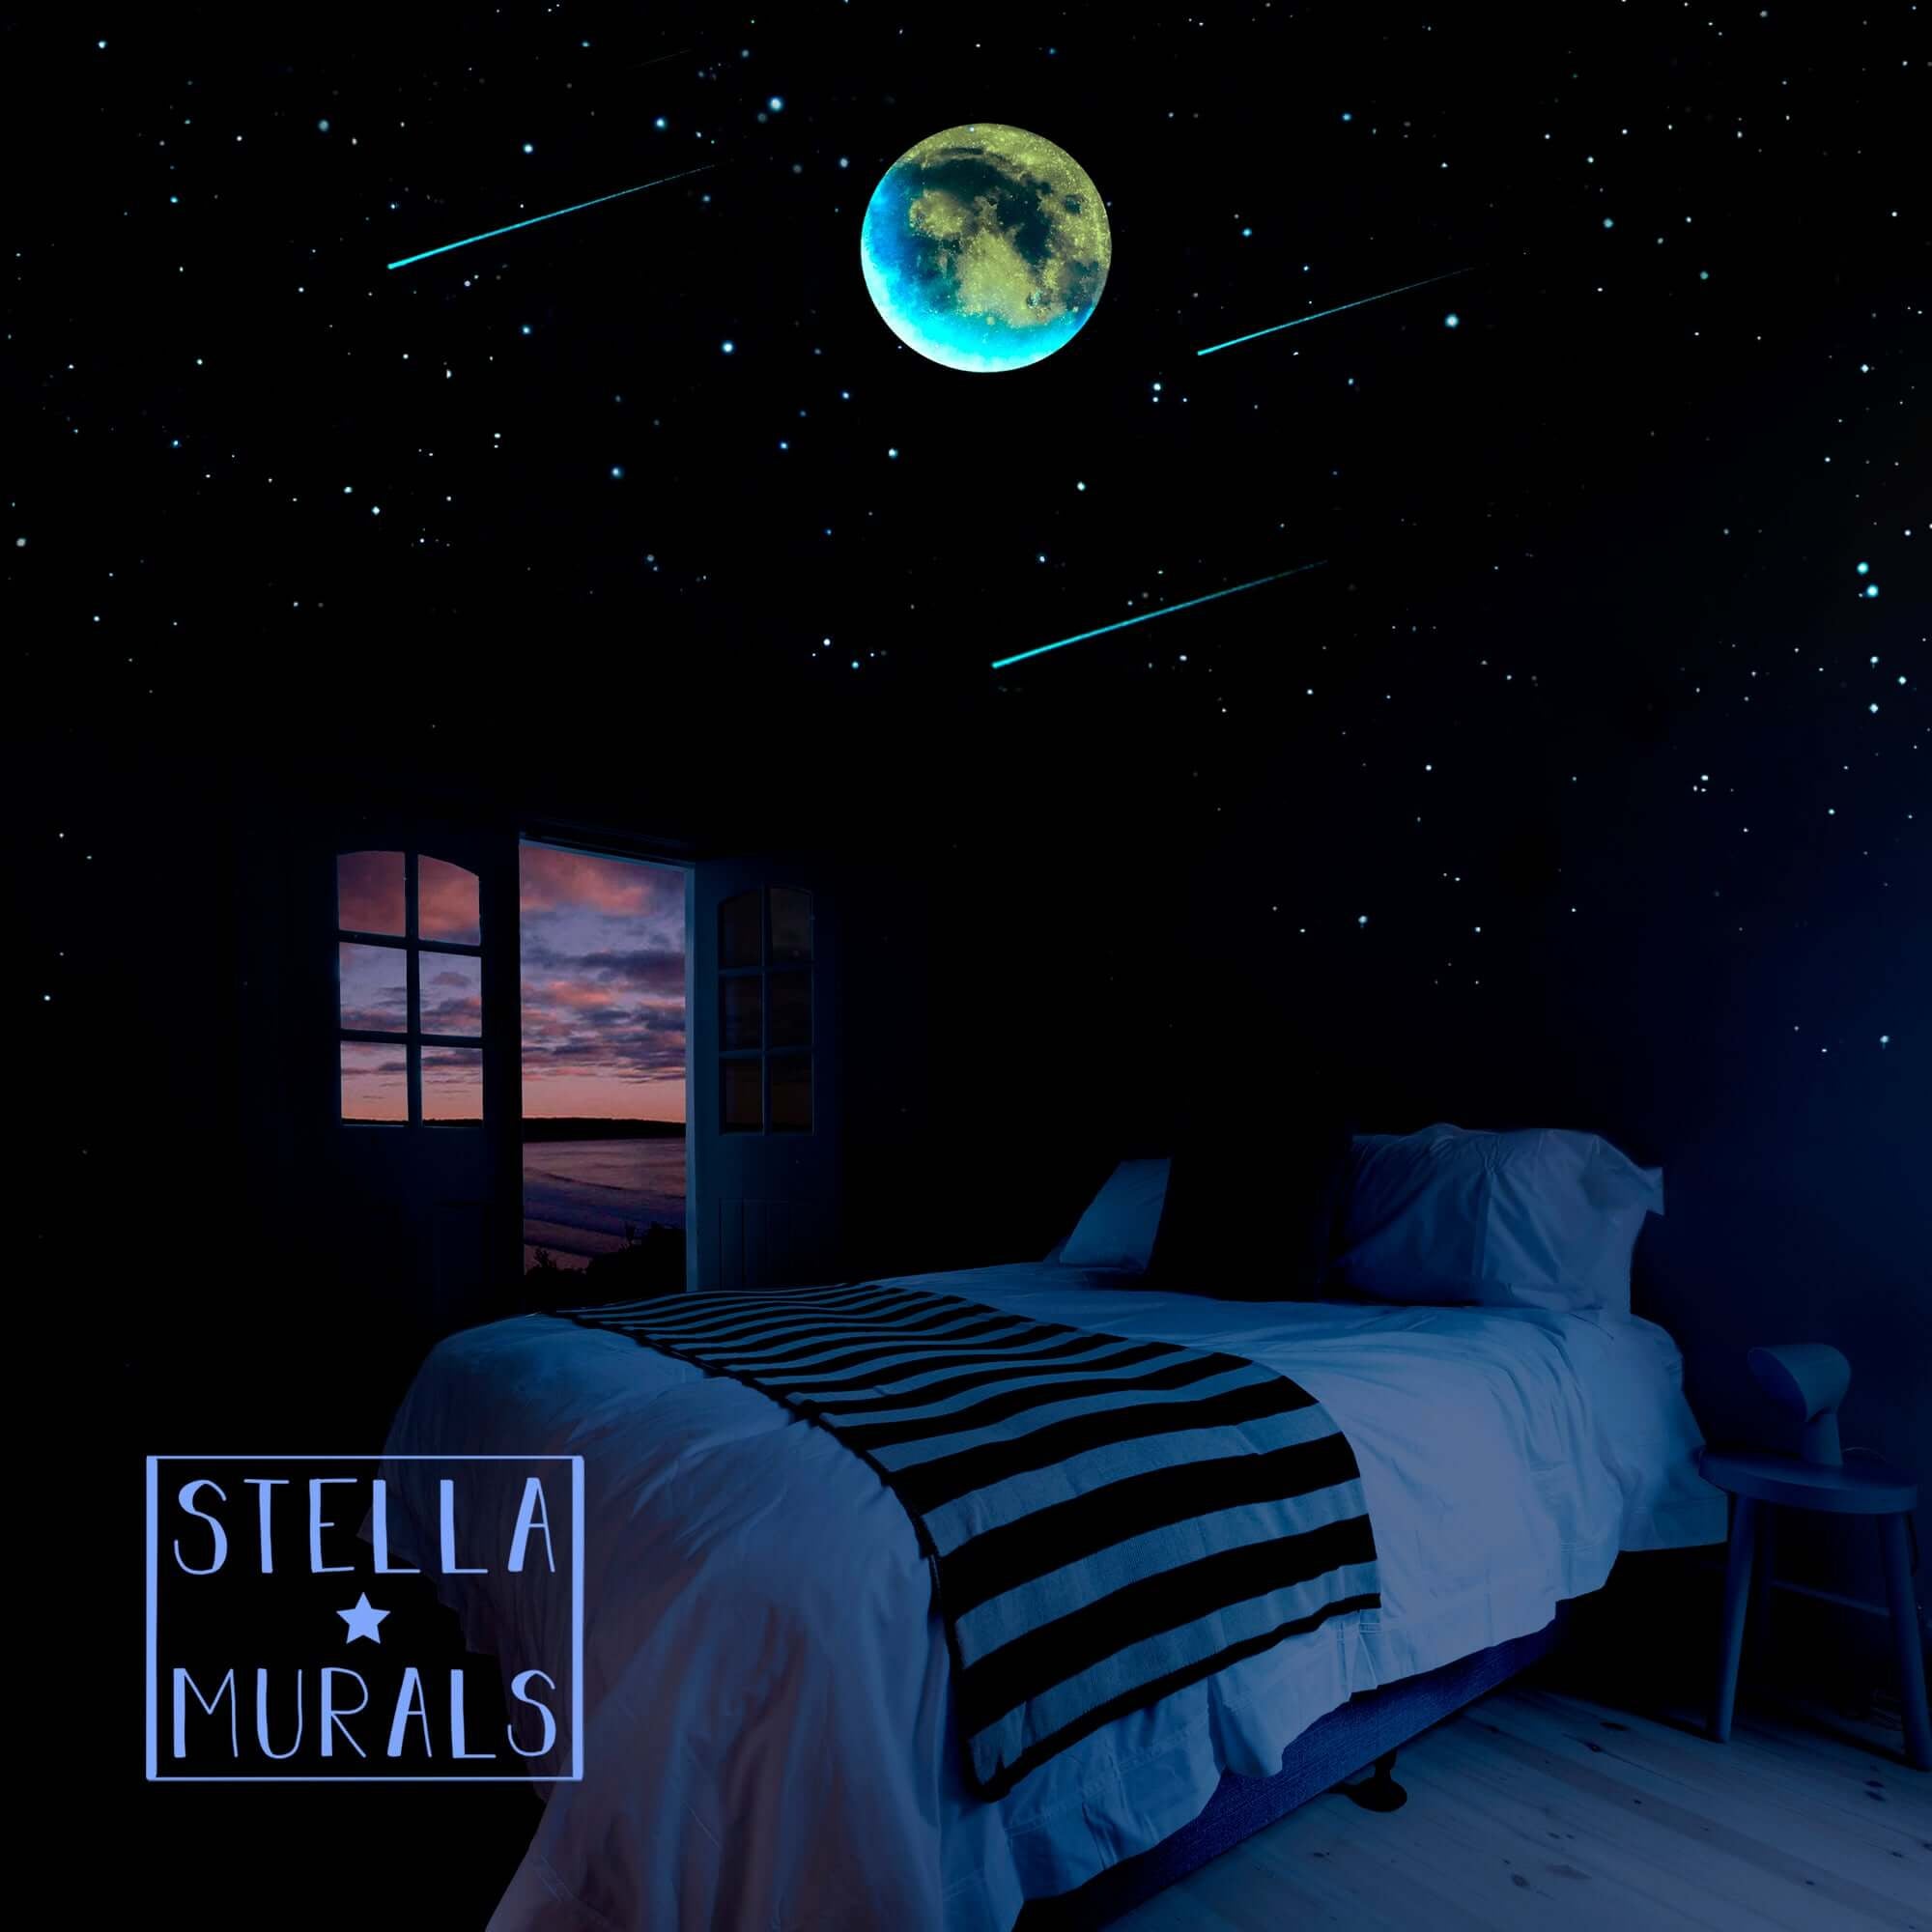 Glow in the dark moon for a starry night sky inspired room. Moon decals and 3D glow stars, black light photoluminescent star ceiling 